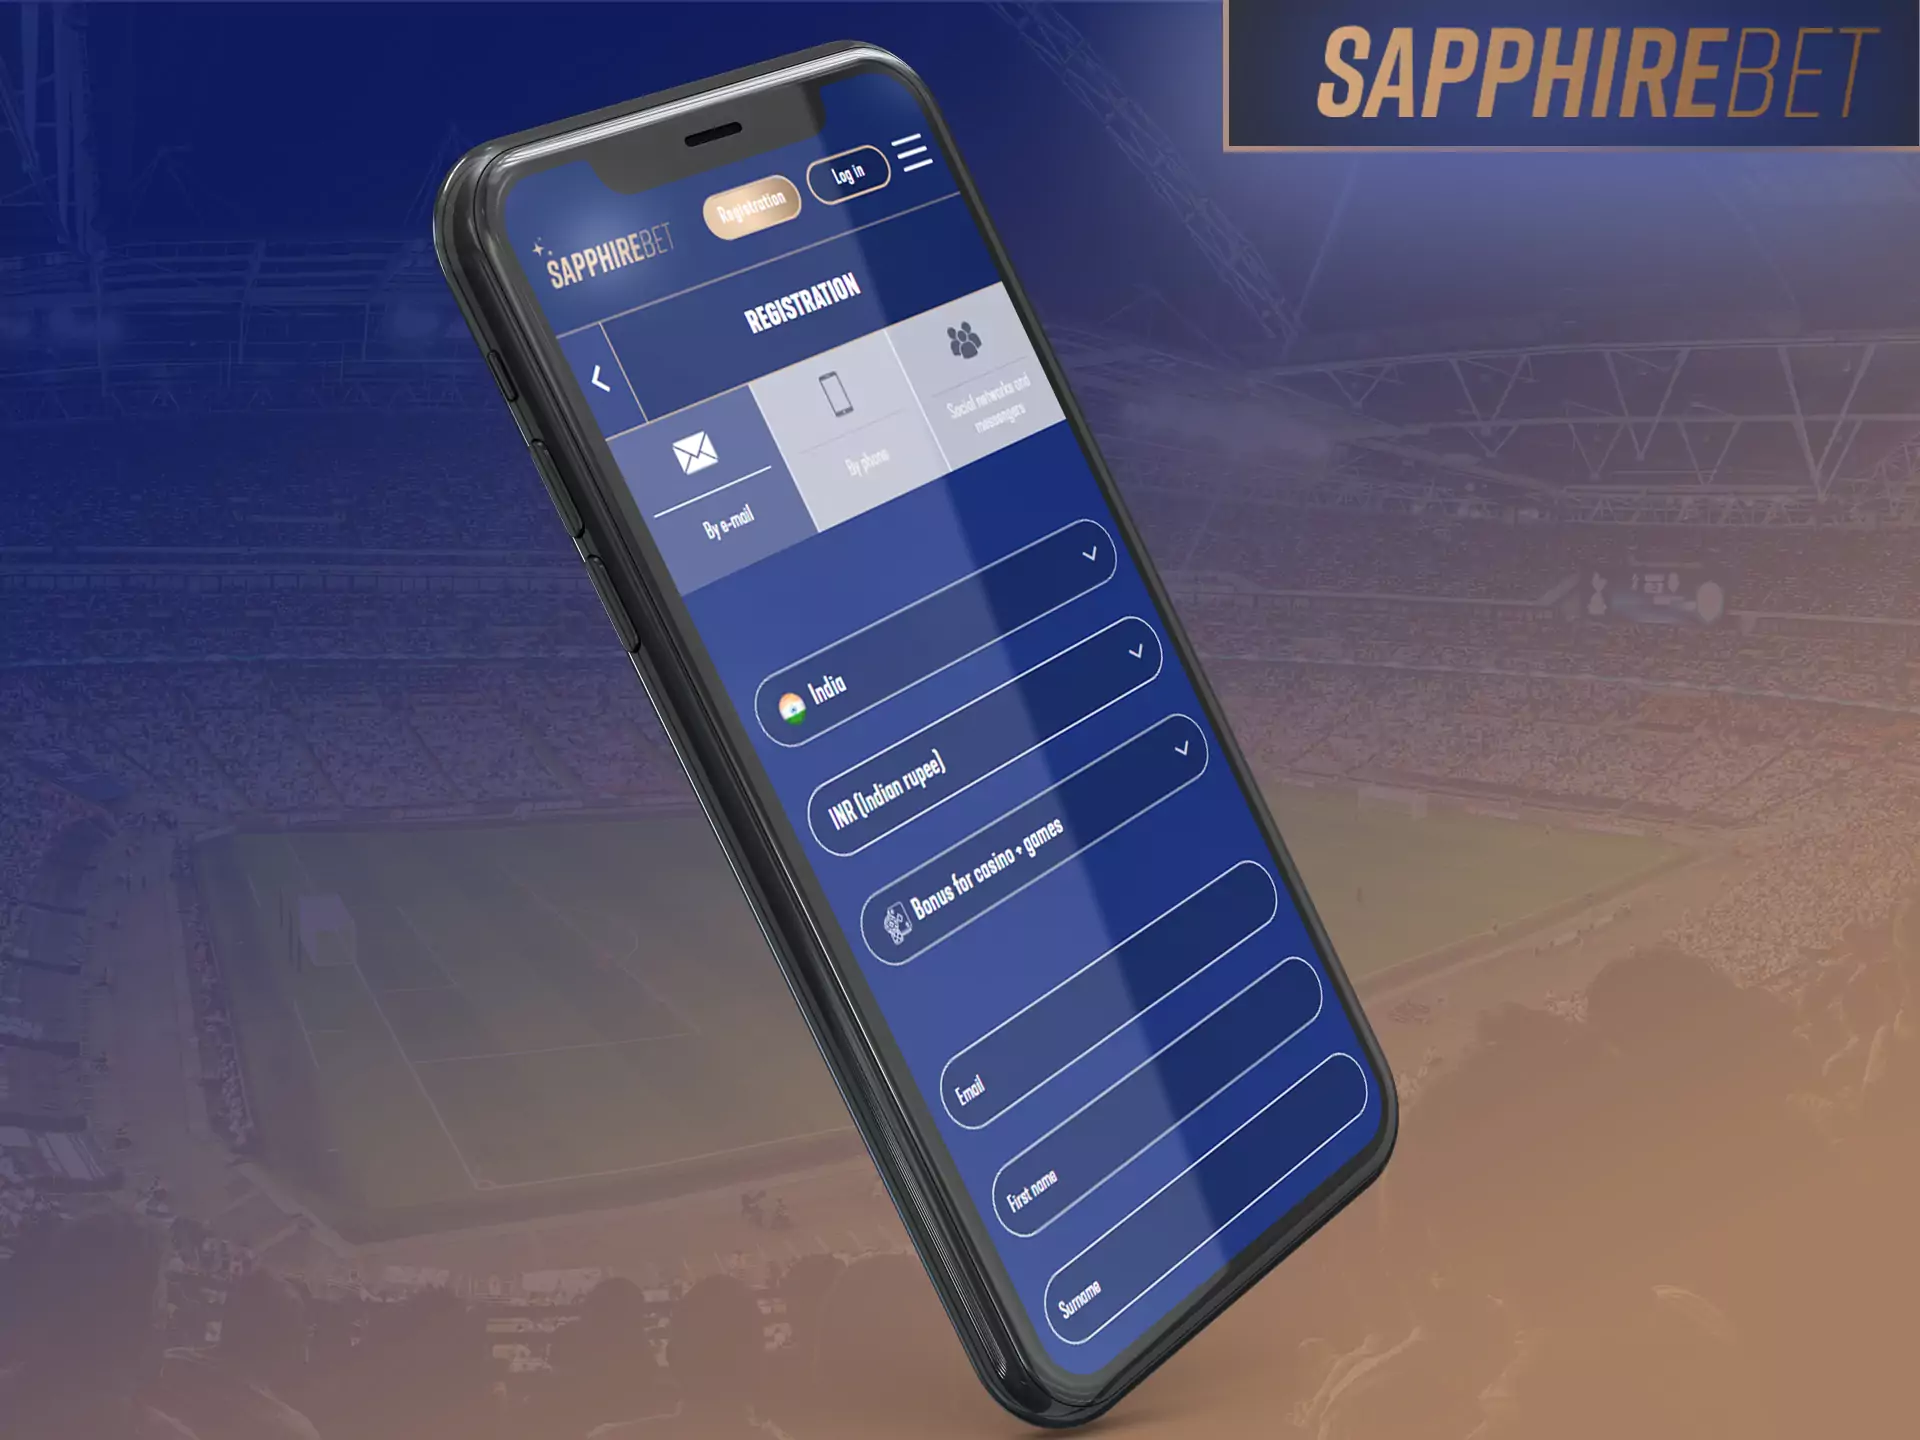 Go through a simple and quick registration in Sapphirebet, get access to all bonuses and functions.